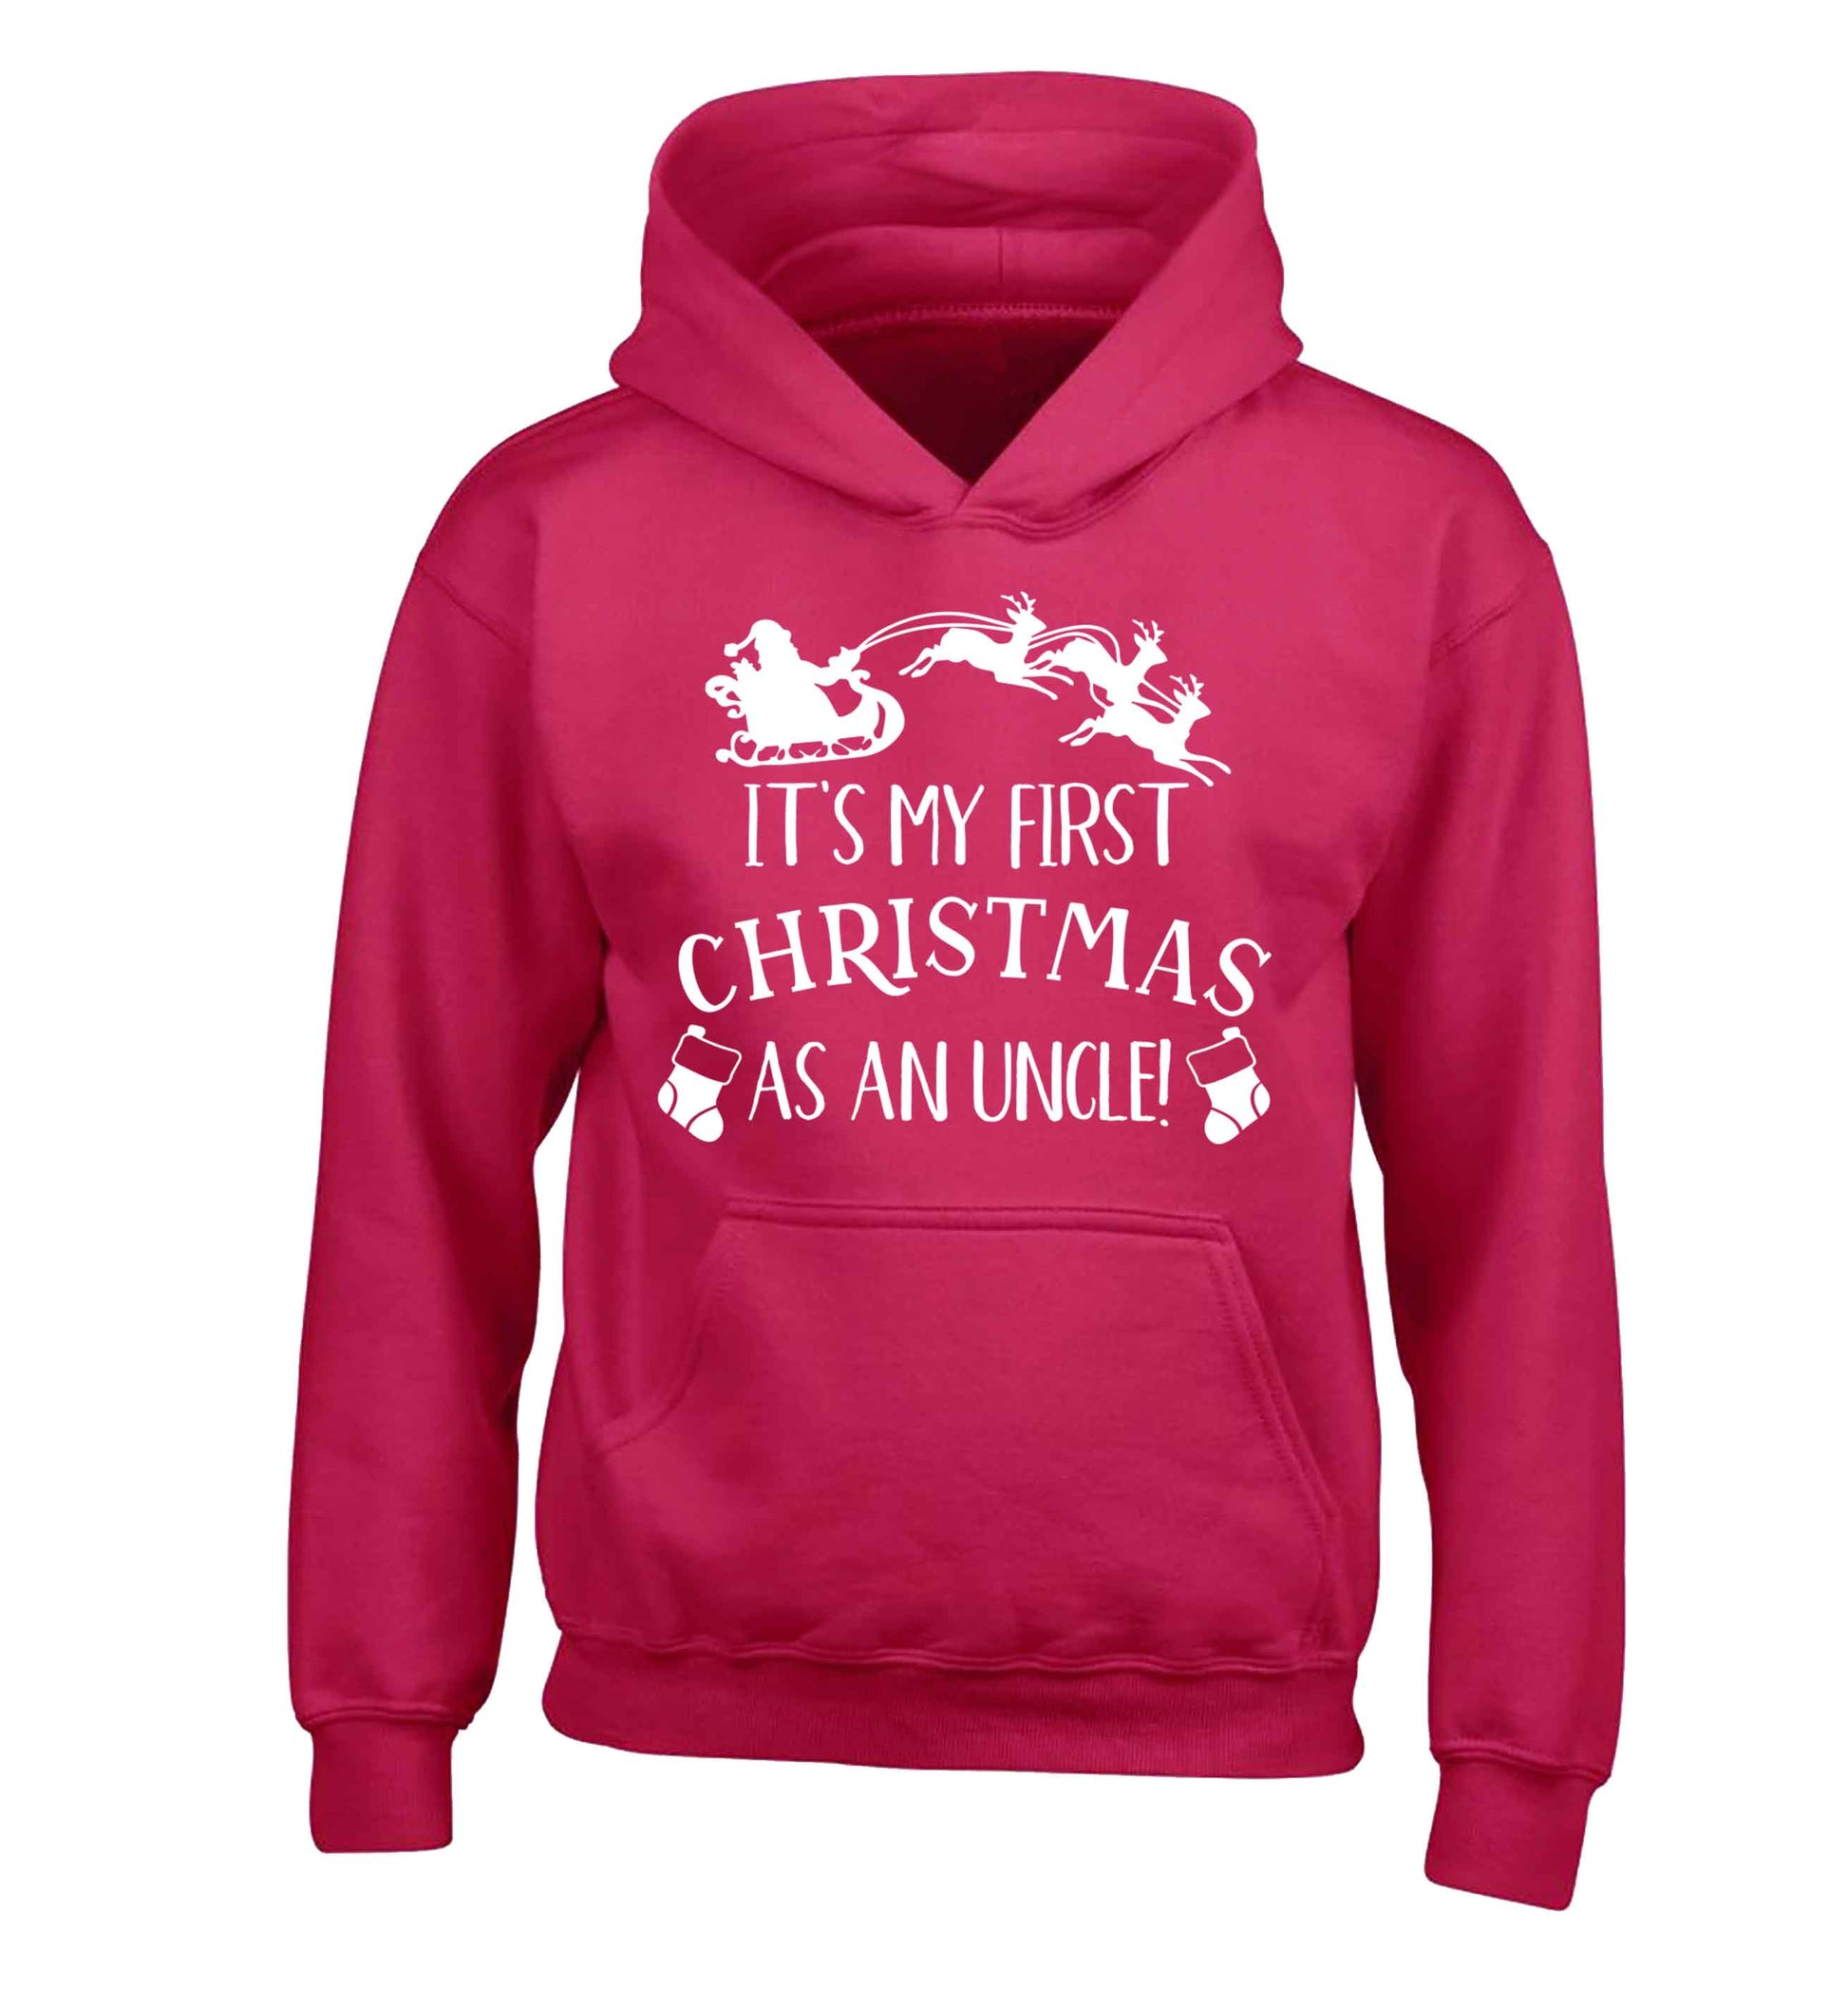 It's my first Christmas as an uncle! children's pink hoodie 12-13 Years